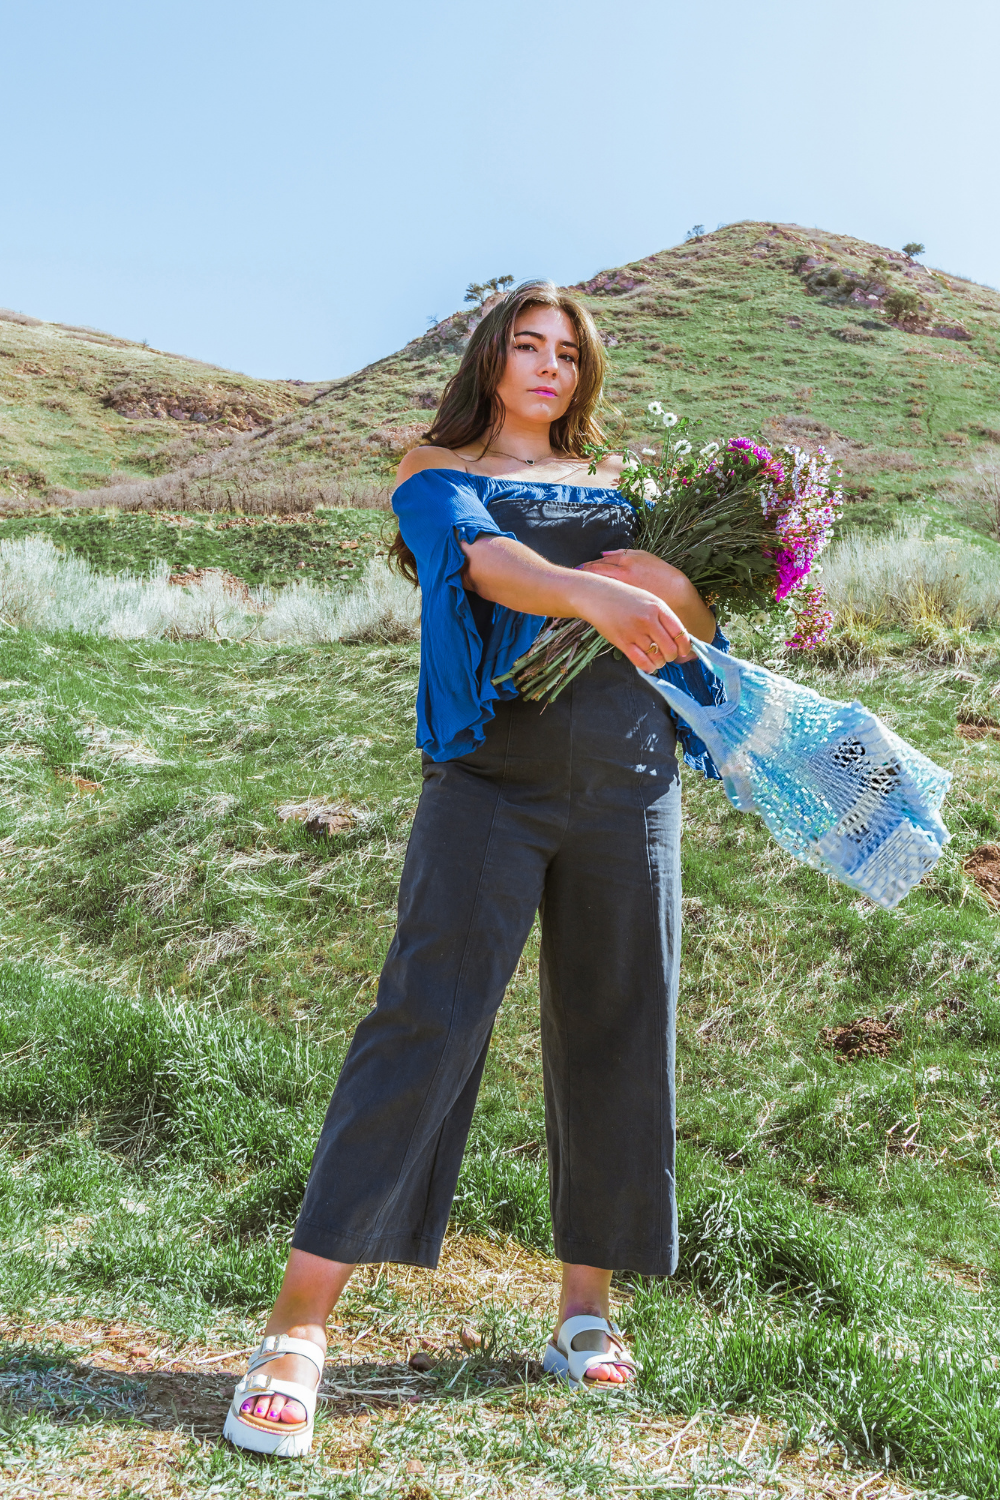 Midsize fashion blogger Lauryn Hock of Lauryncakes social media stands in a green field of grass near Downtown Salt Lake City holding a bouquet of flowers and wearing blue overalls and an off the shoulder top. She has a netted reusable bag in her hand